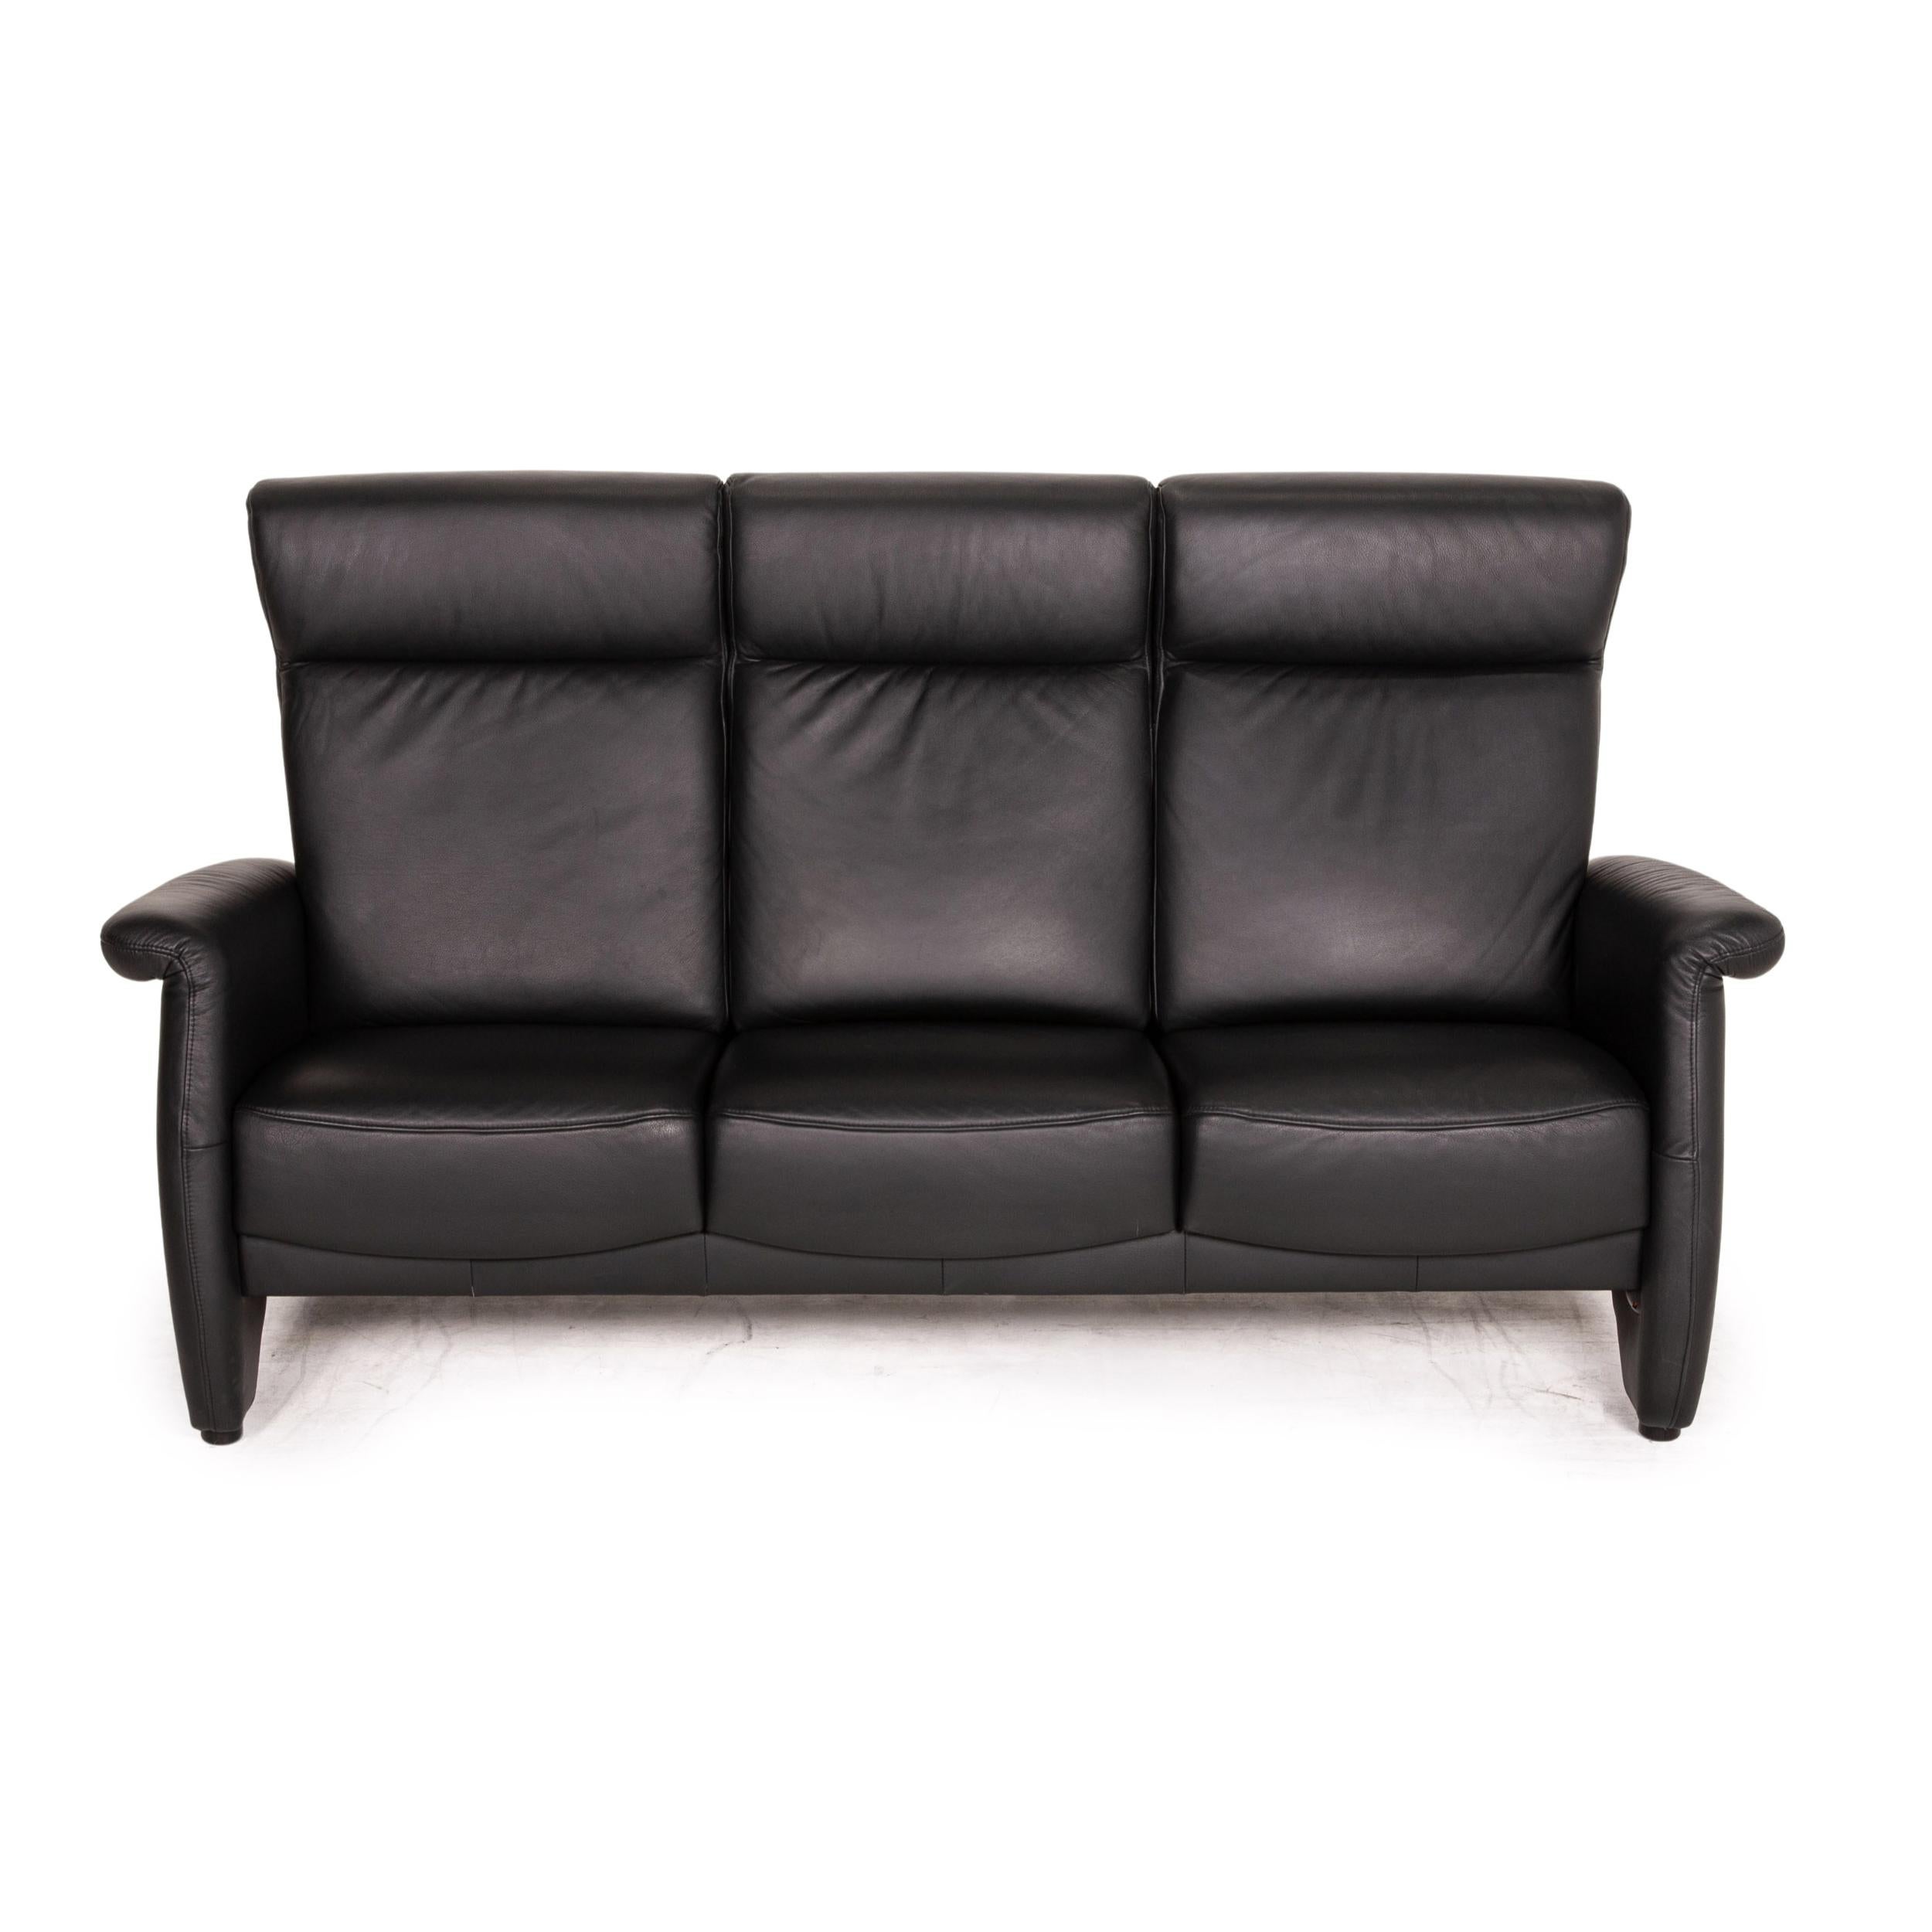 Himolla Ergoline Leather Sofa Black Three Seater Function Couch For Sale 2